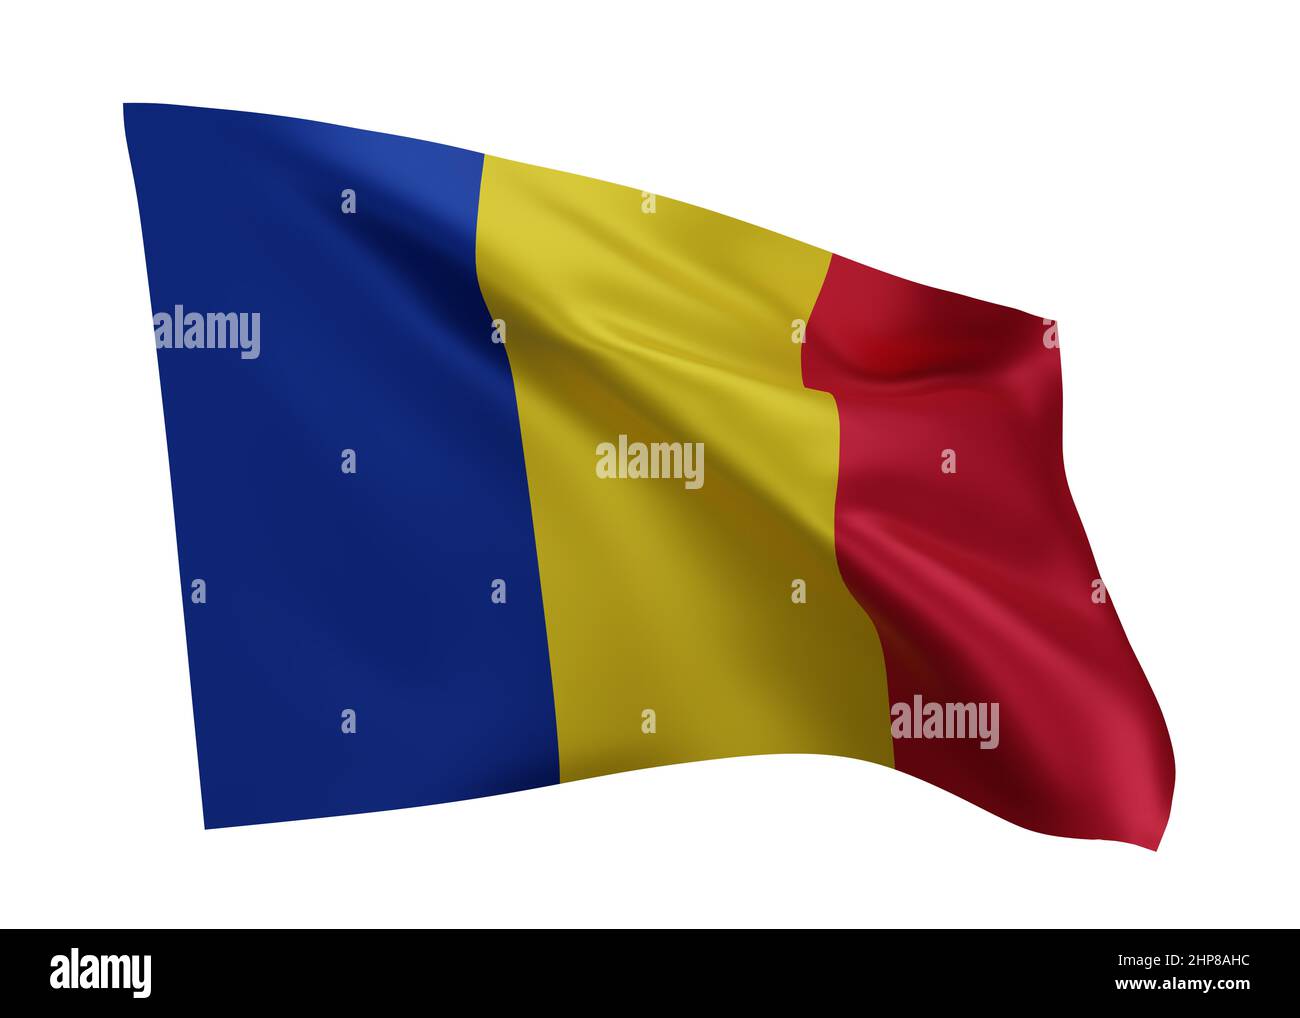 3d illustration flag of Romania. Romanian high resolution flag isolated against white background. 3d rendering Stock Photo